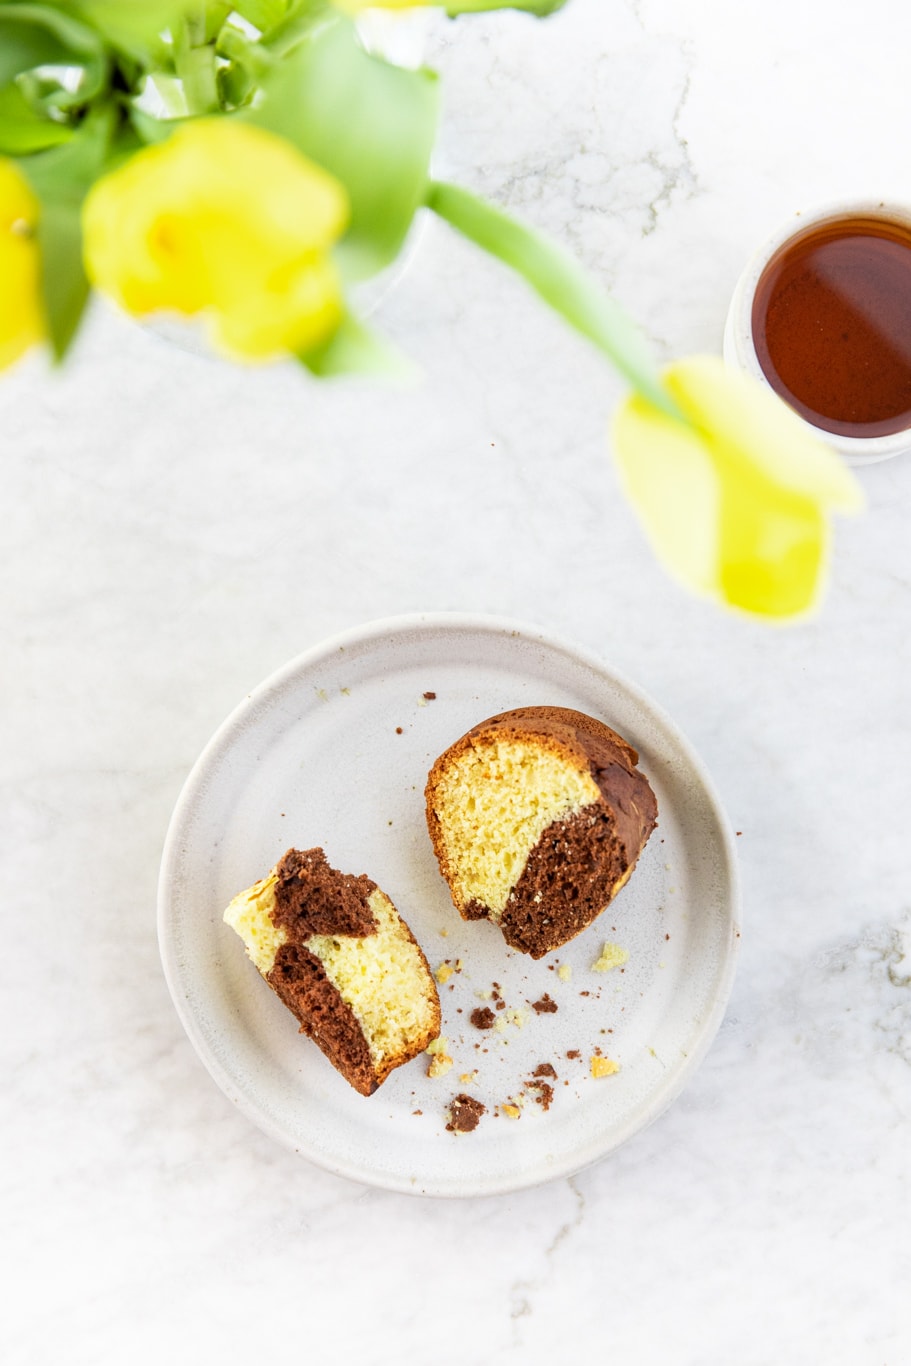 Slices of Vanilla Chocolate Marble Bundt Cake with cup of tea and vase of yellow tulips